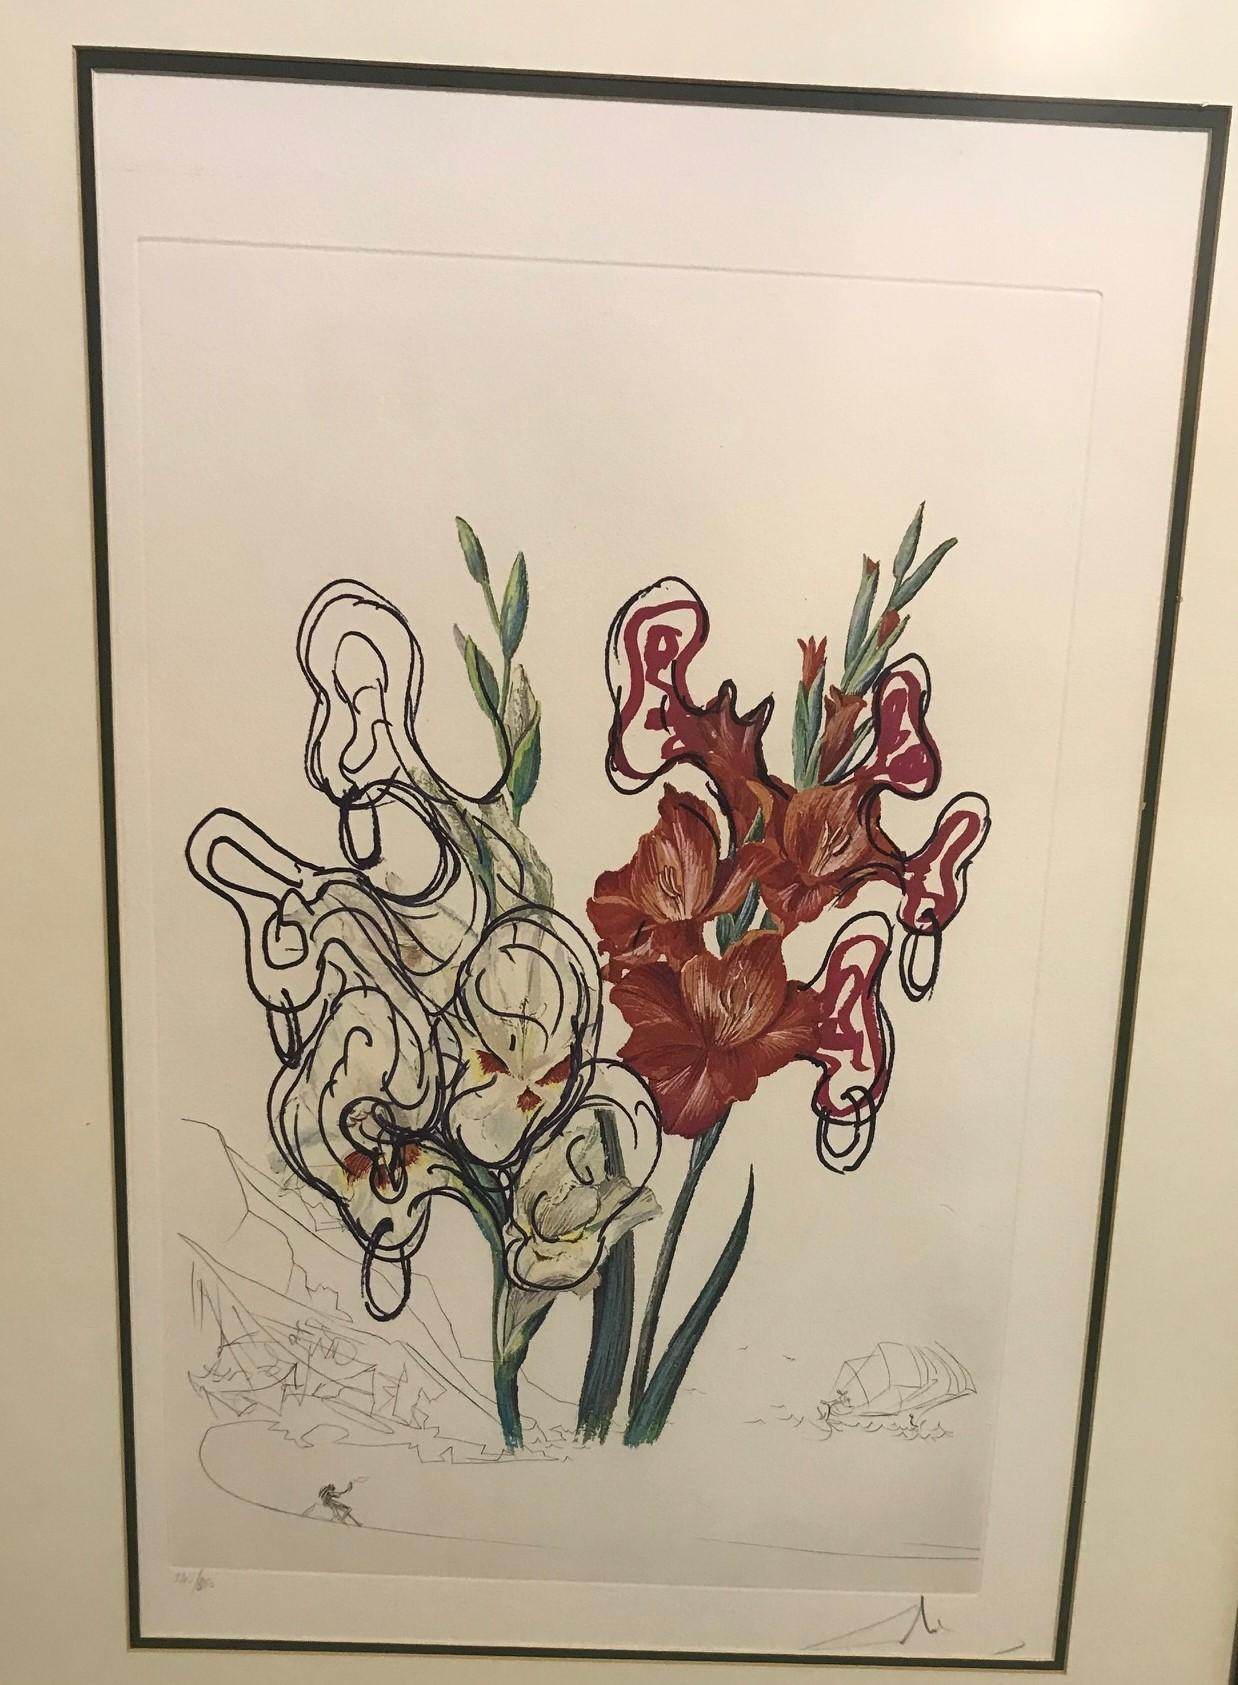 A wonderful image by renowned Spanish artist Salvador Dali from the surrealistic flowers portfolio, 1972.

Hand pencil signed and numbered (240/350) by Dali.

Would make for a great addition to any modern or surrealist art collection or